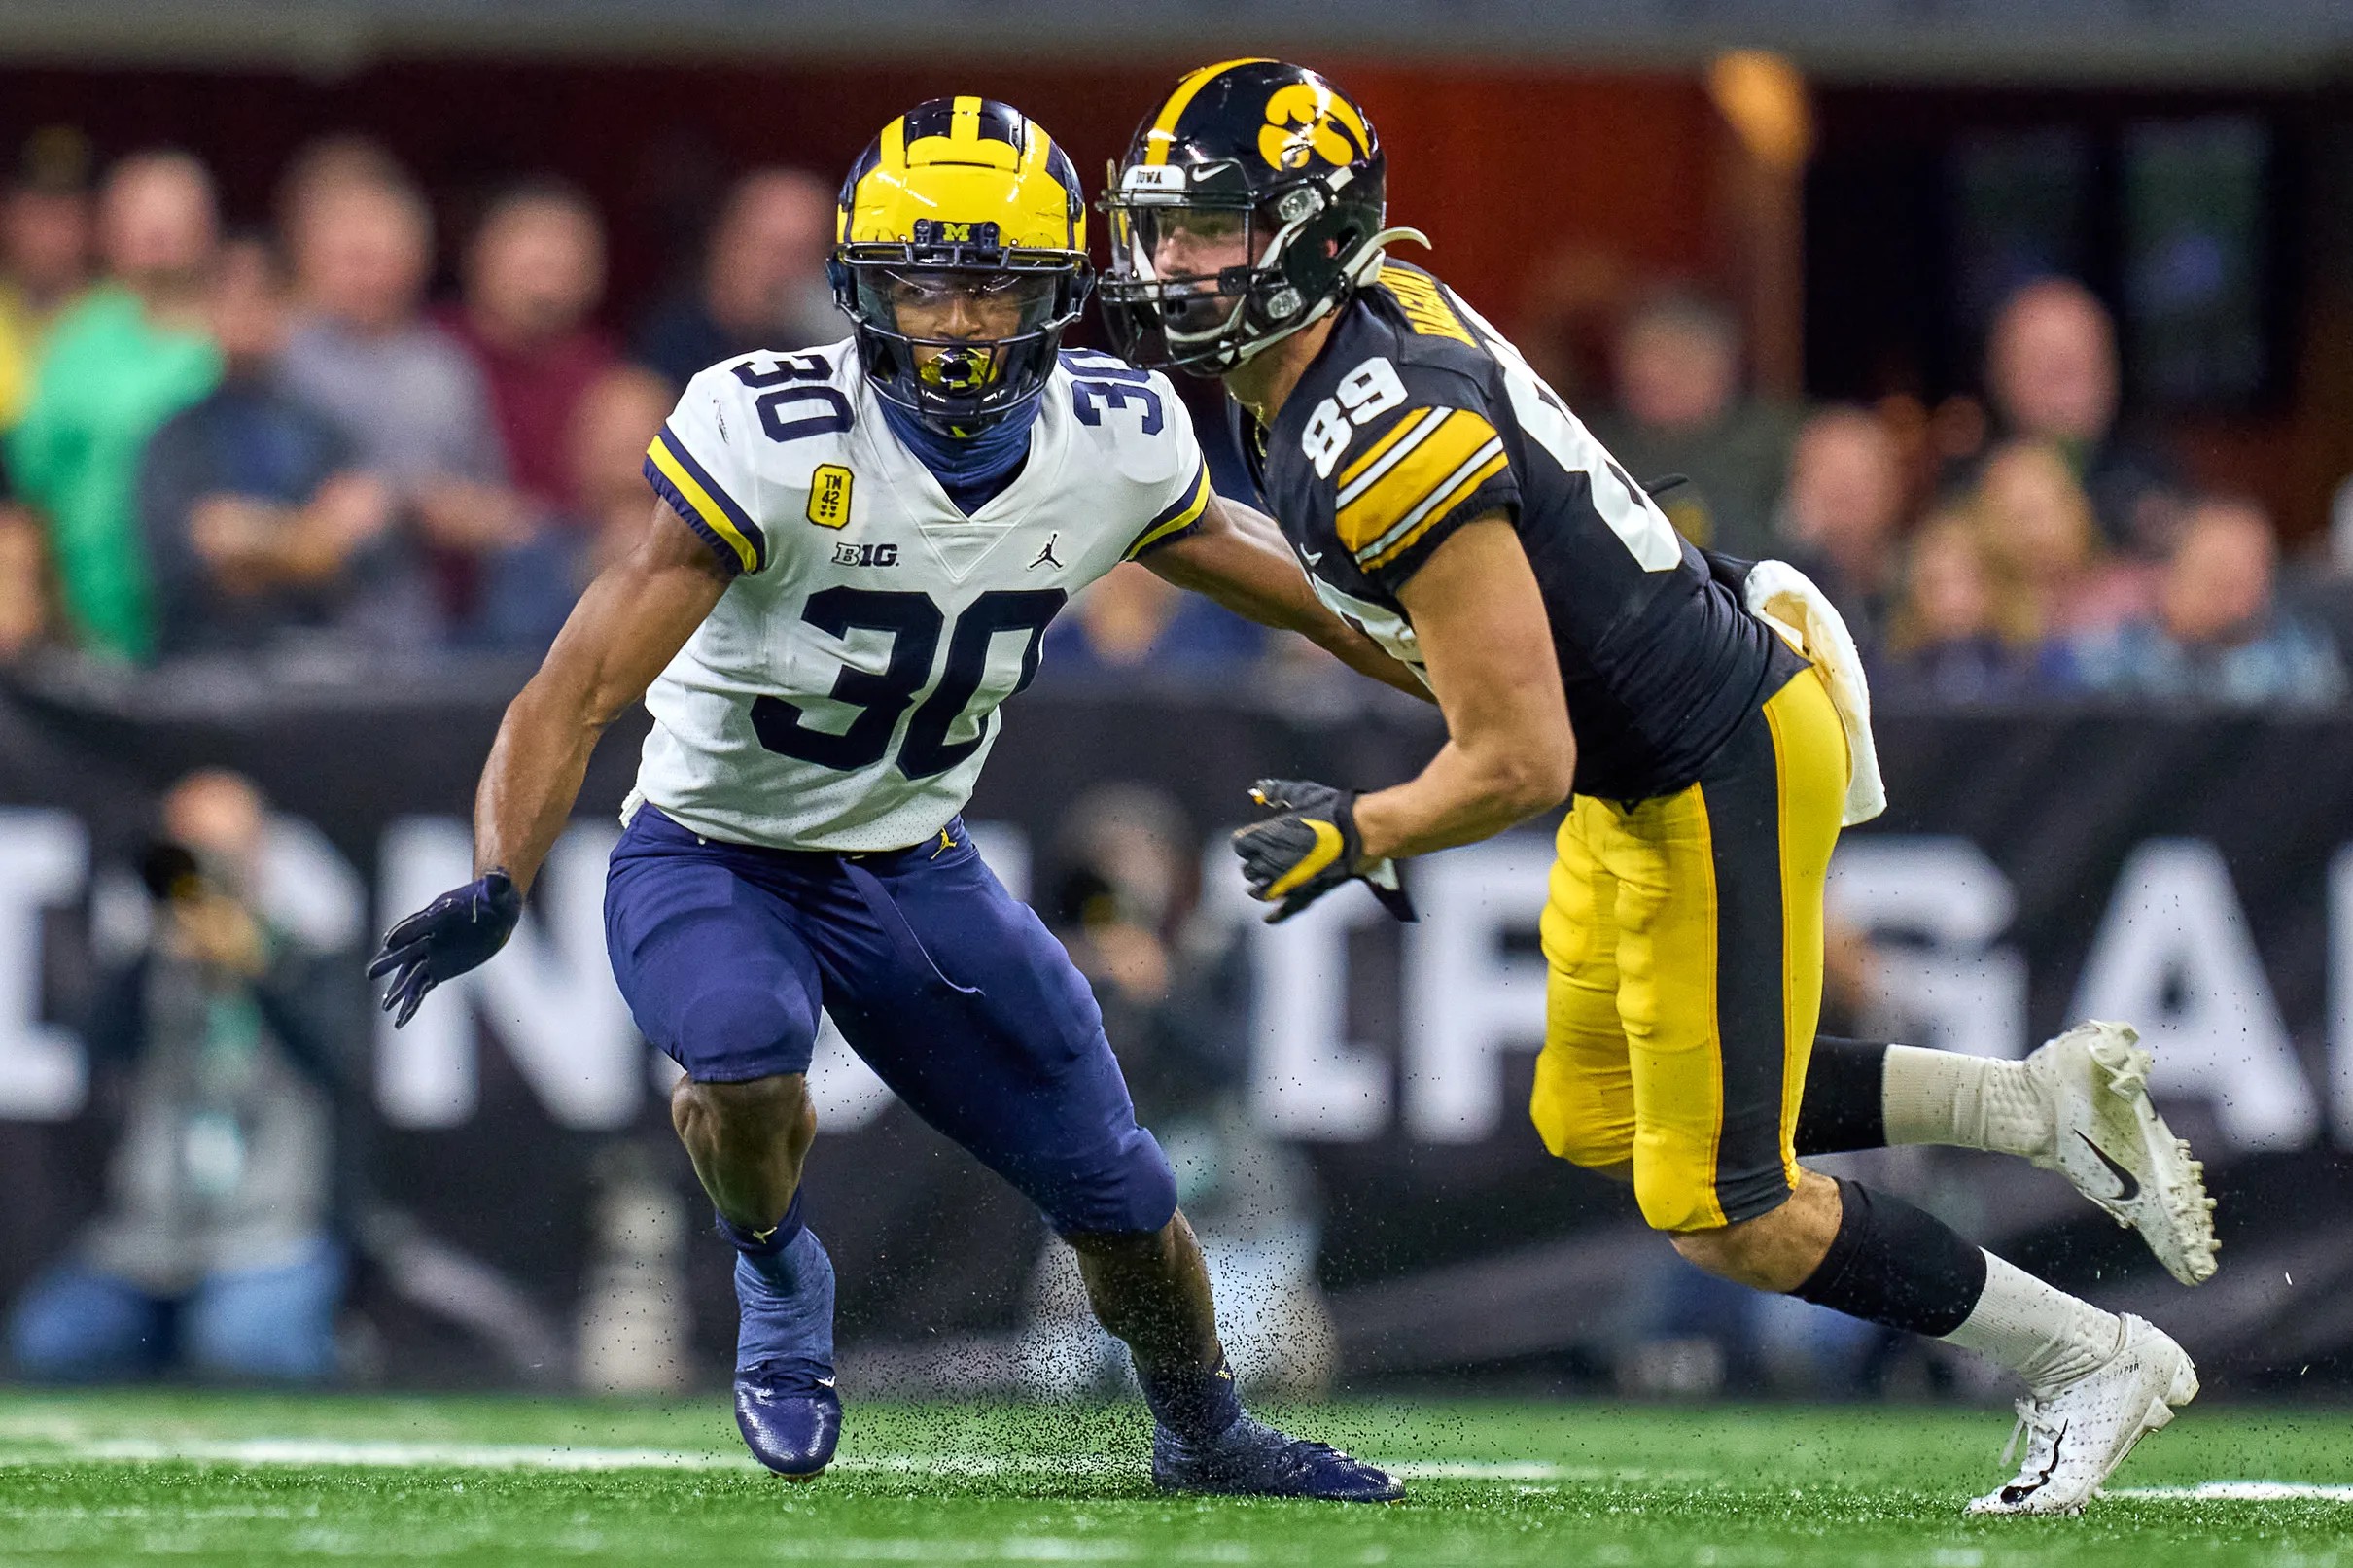 2022 NFL Mock Draft The Steelers fill a current hole in the secondary